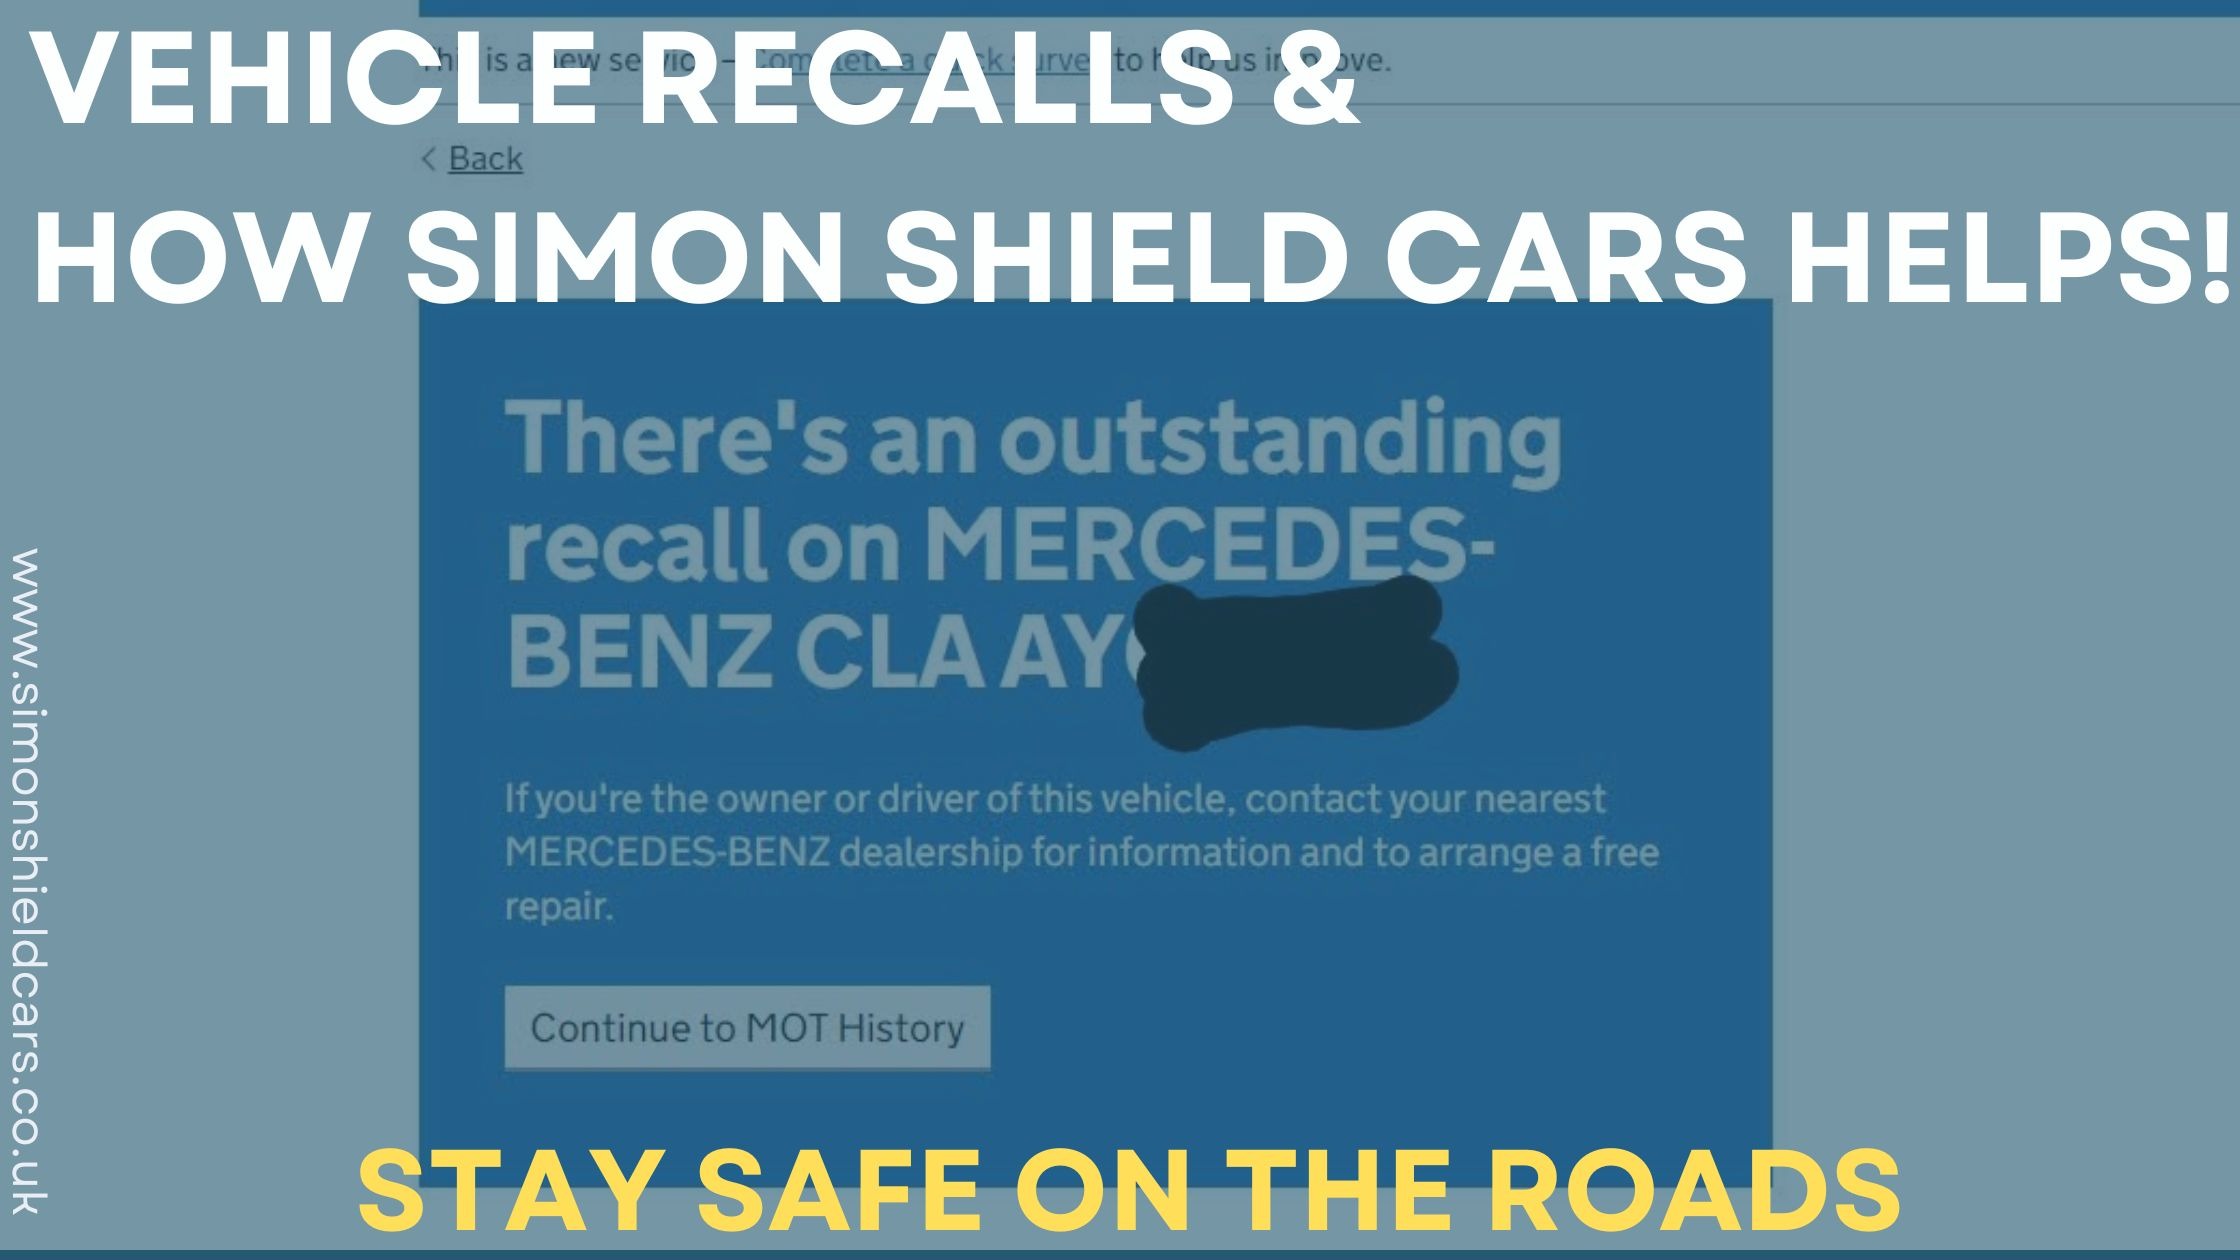 Stay safe on the road: Vehicle recalls & How Simon Shield Cars Helps!